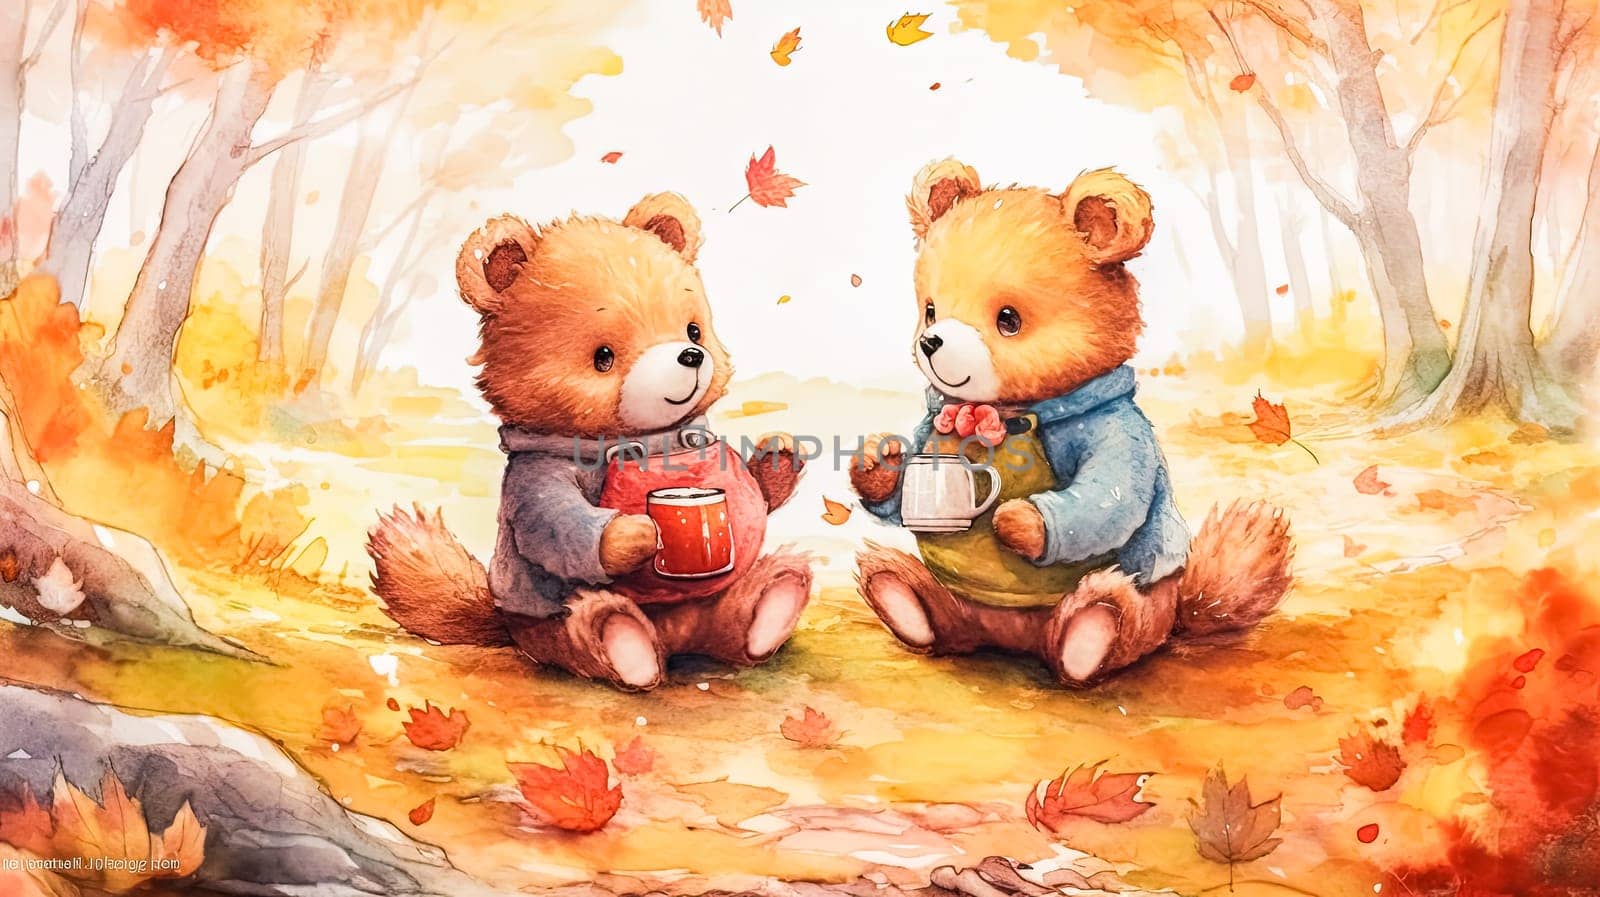 A delightful watercolor depiction showcasing adorable bear cubs nestled in the enchanting aura of an autumn forest, ideal for book illustrations and nature themed projects.